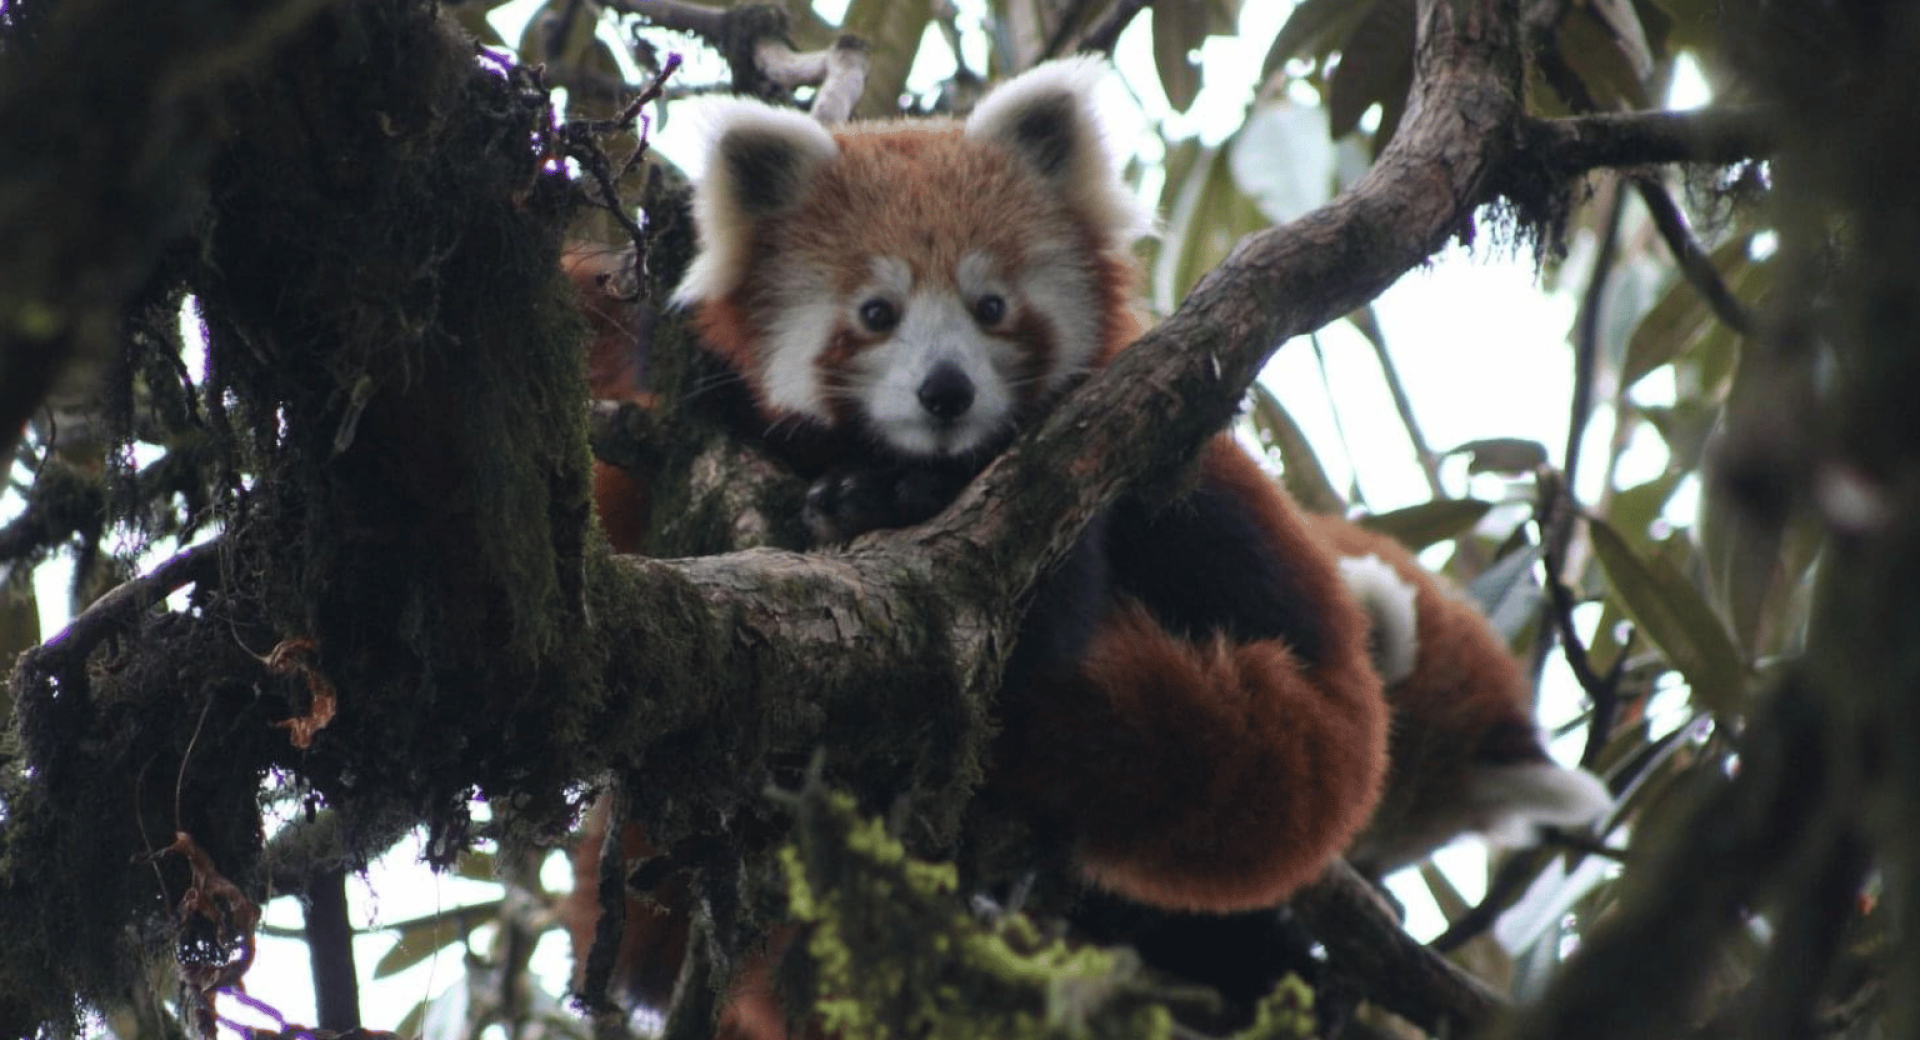 The Himalayan Habre Center: A Better Future for People and Red Pandas